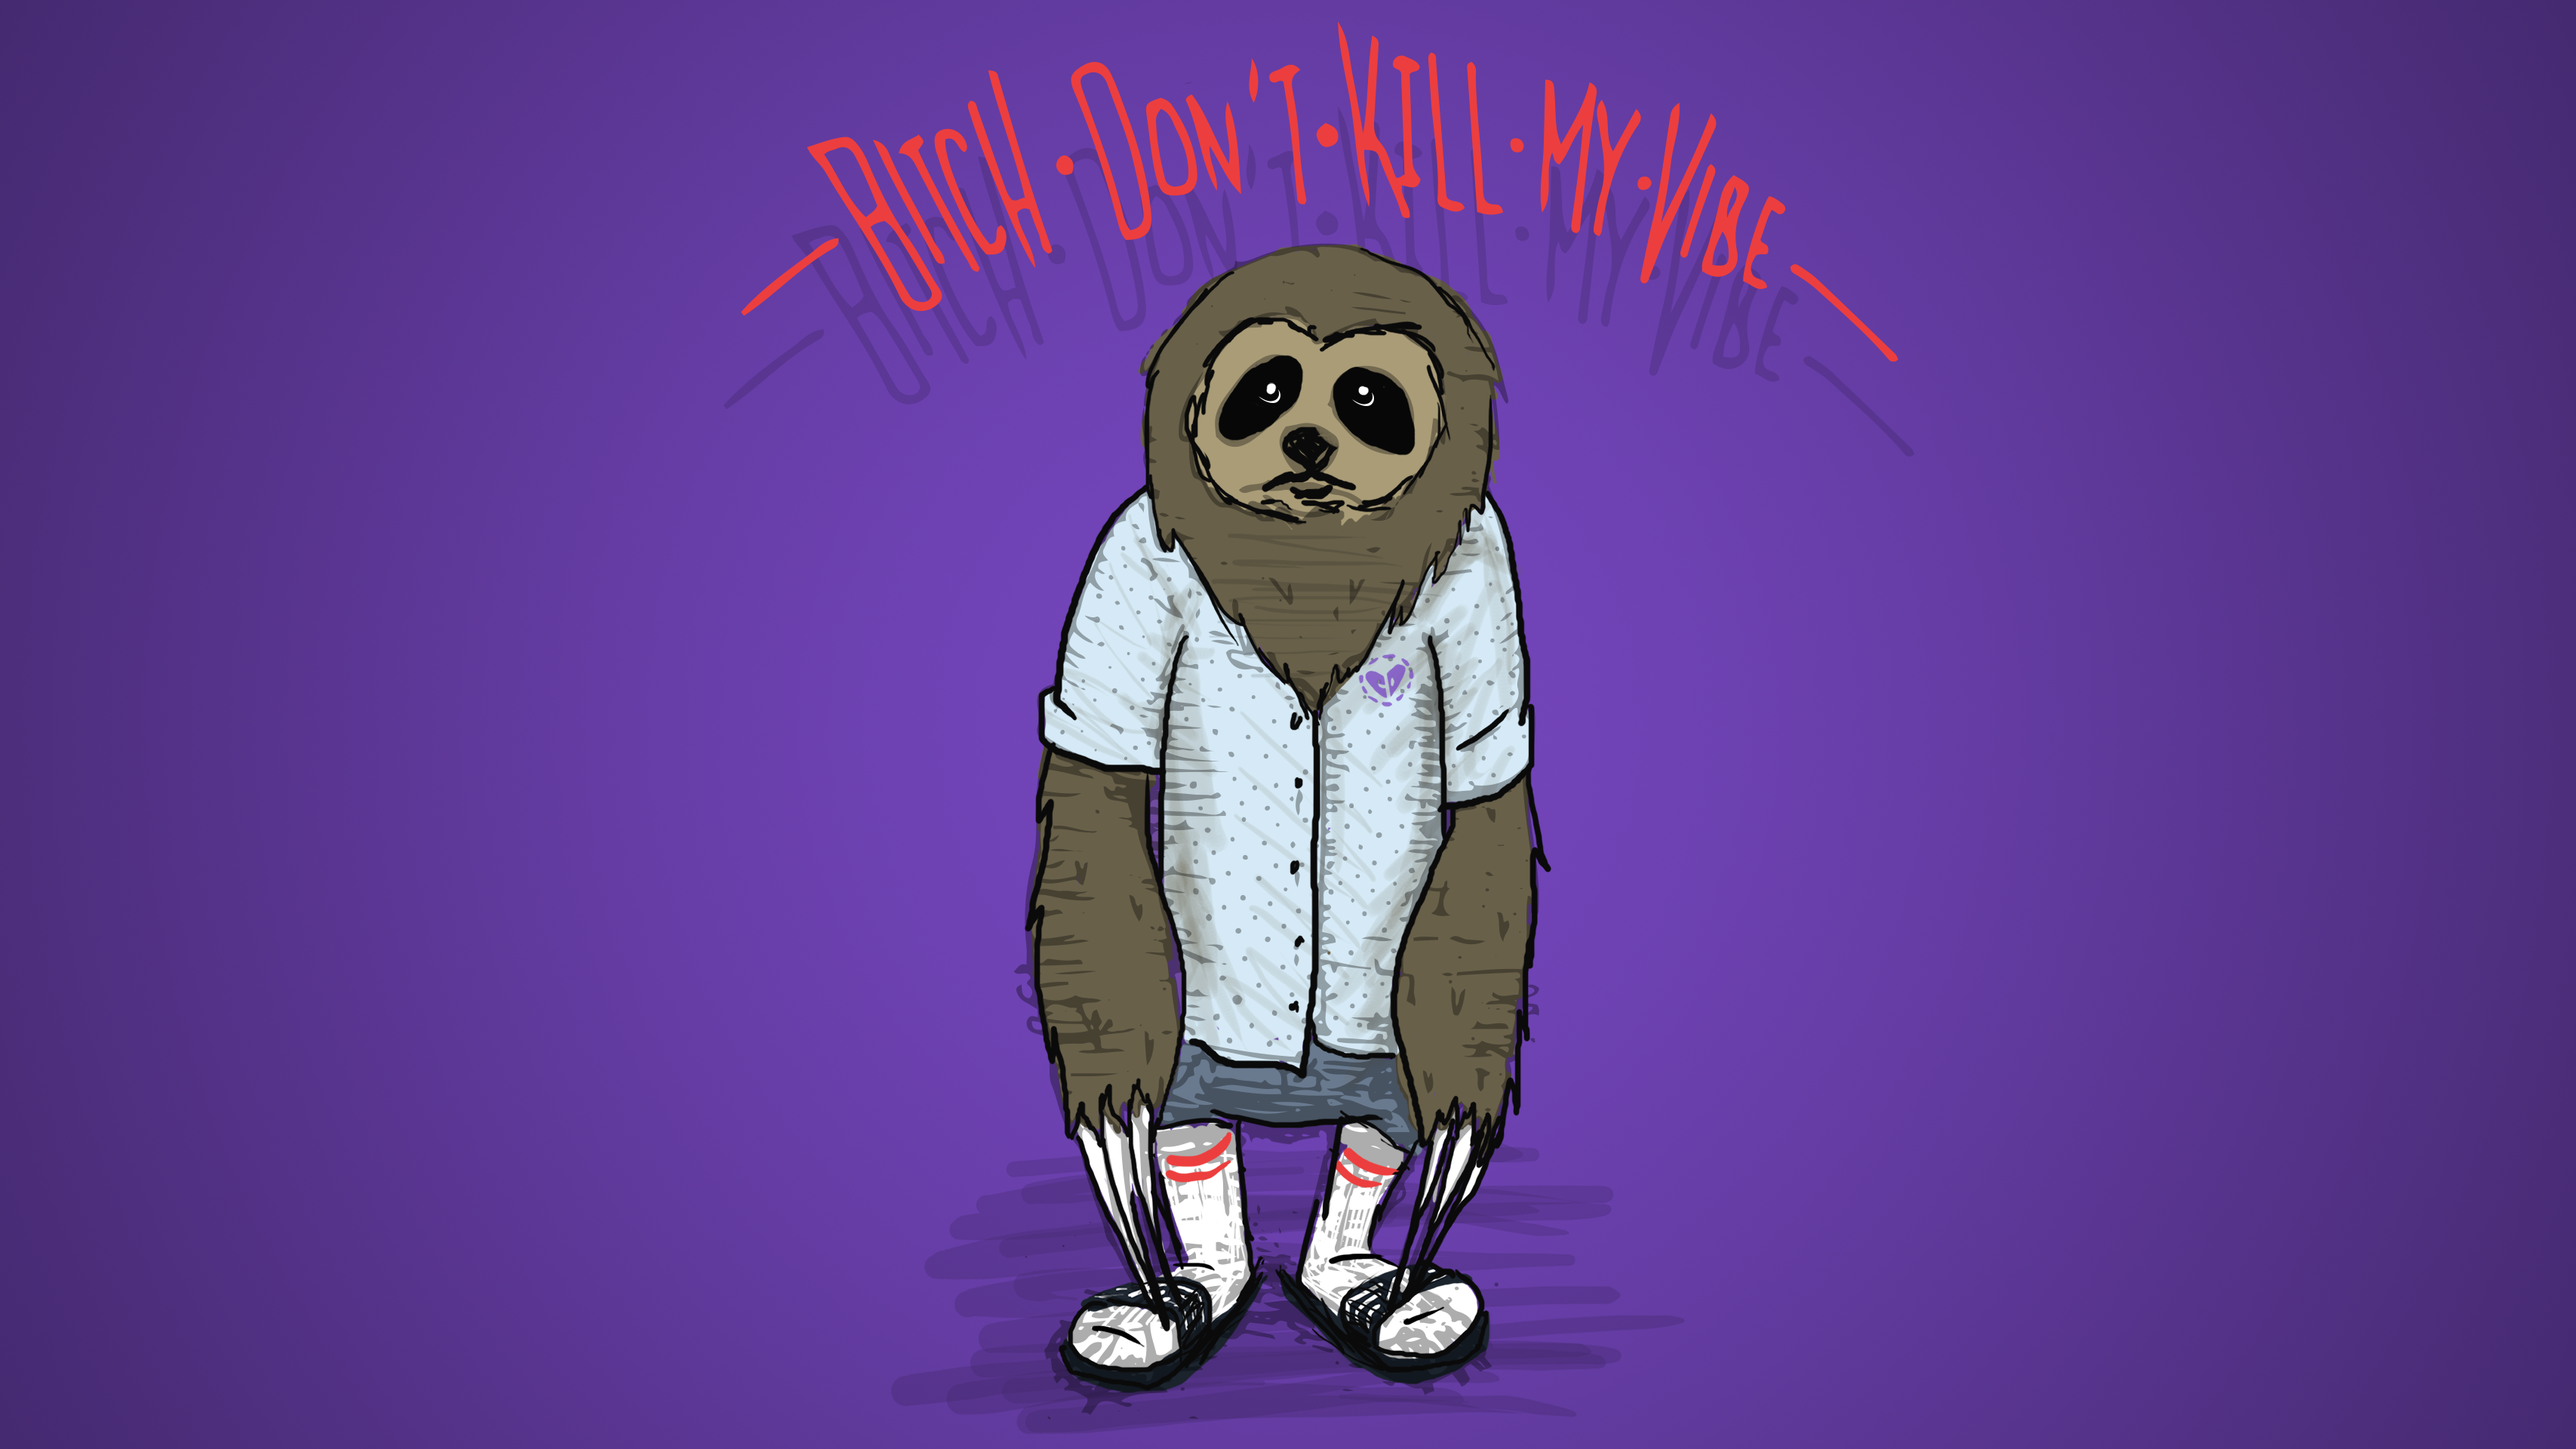 Stoner Sloth is about socks and sandals